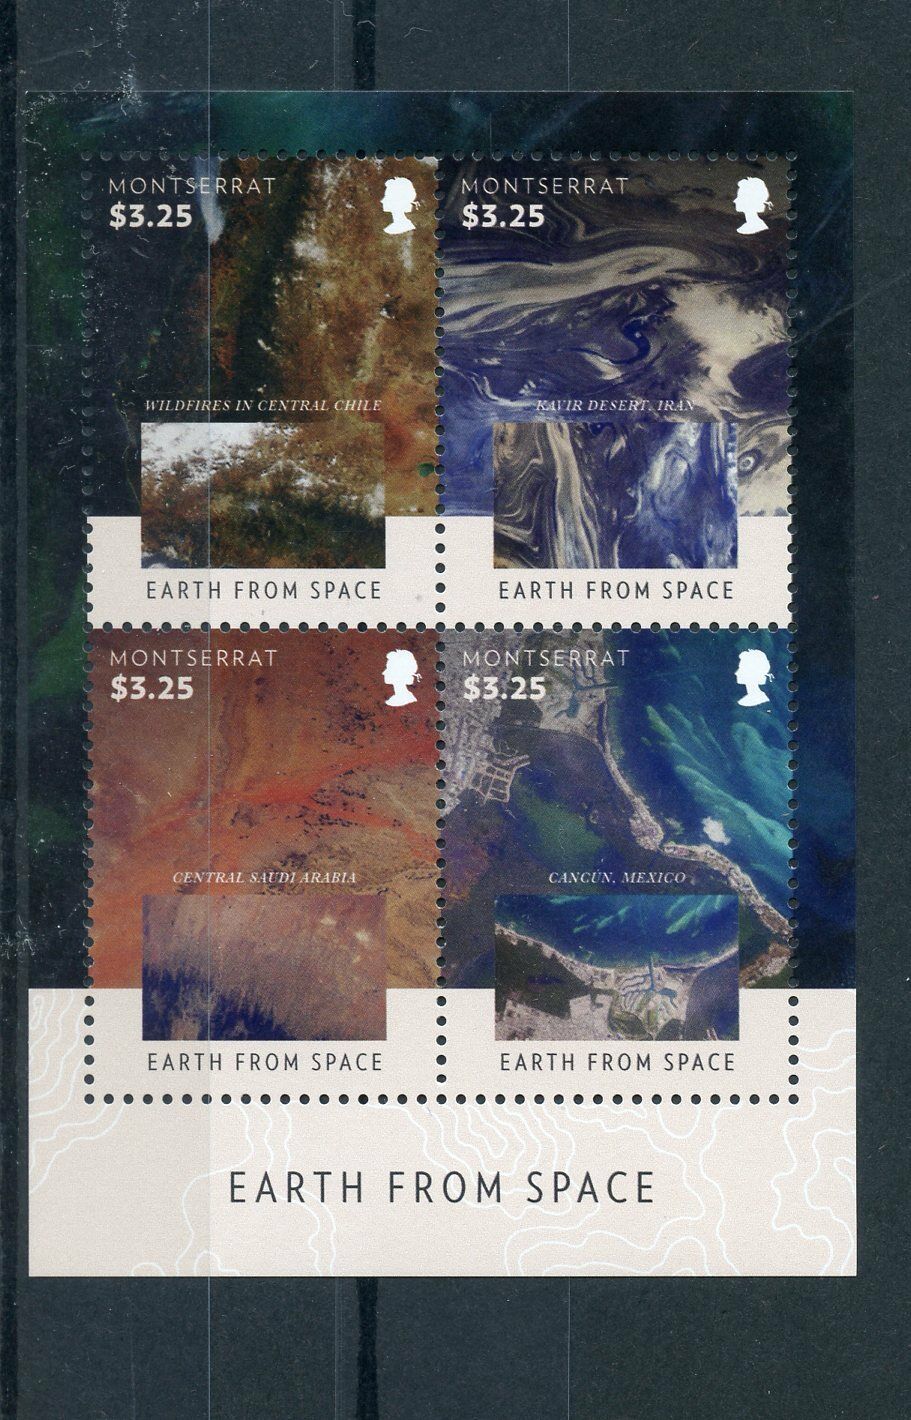 Montserrat 2015 MNH Earth from Space 4v M/S Aerial Photography